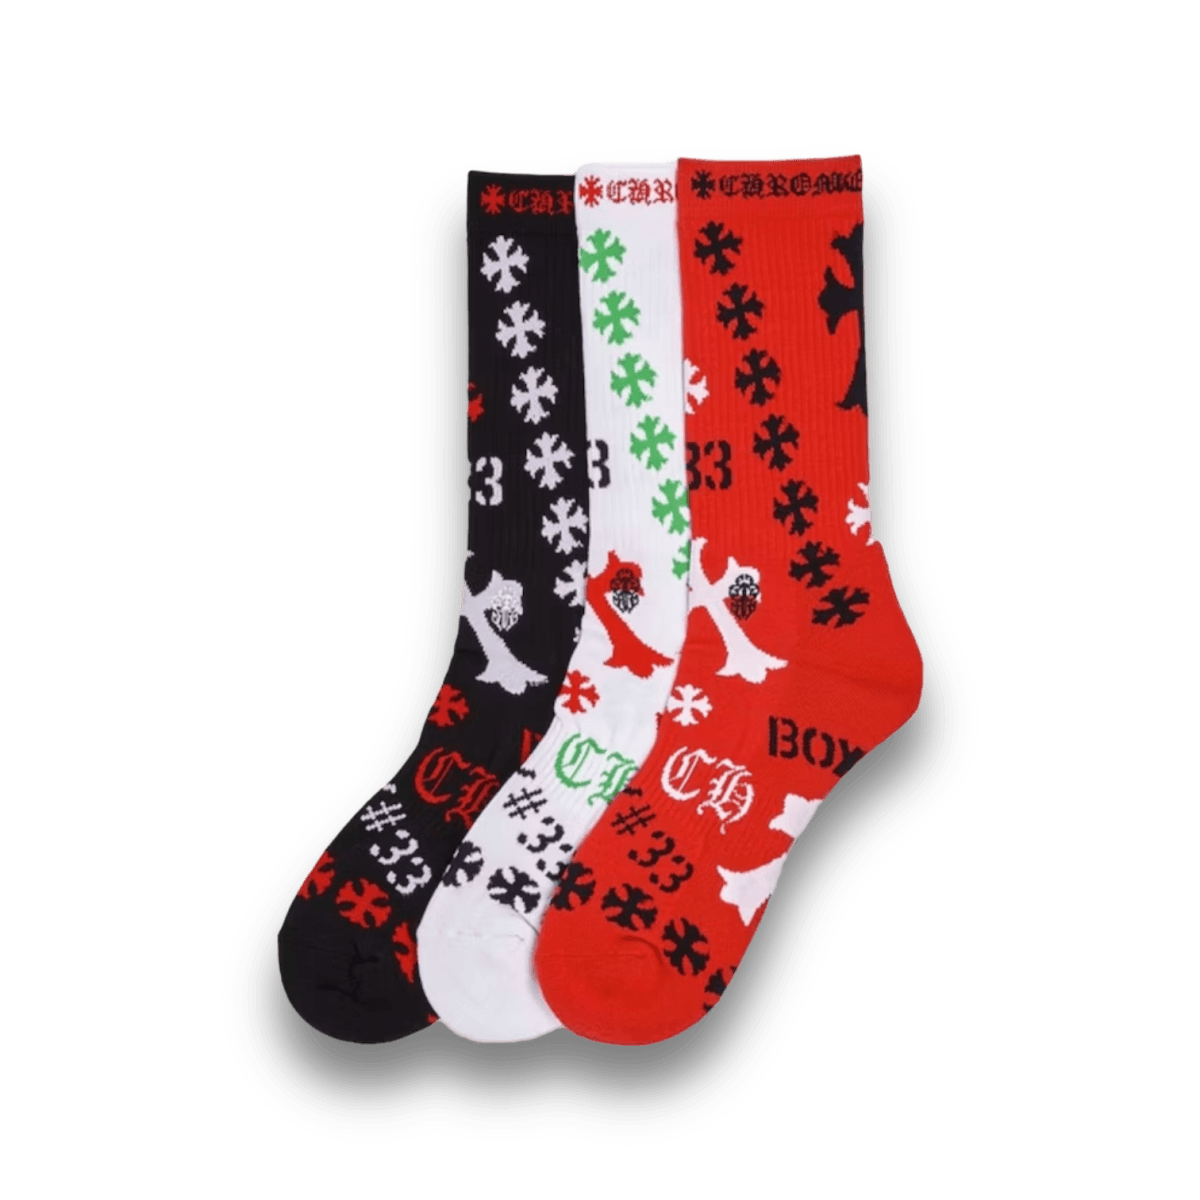 Chrome Hearts Stencil Socks Red - Accessories - Chrome Hearts - Jawns on Fire - sneakers